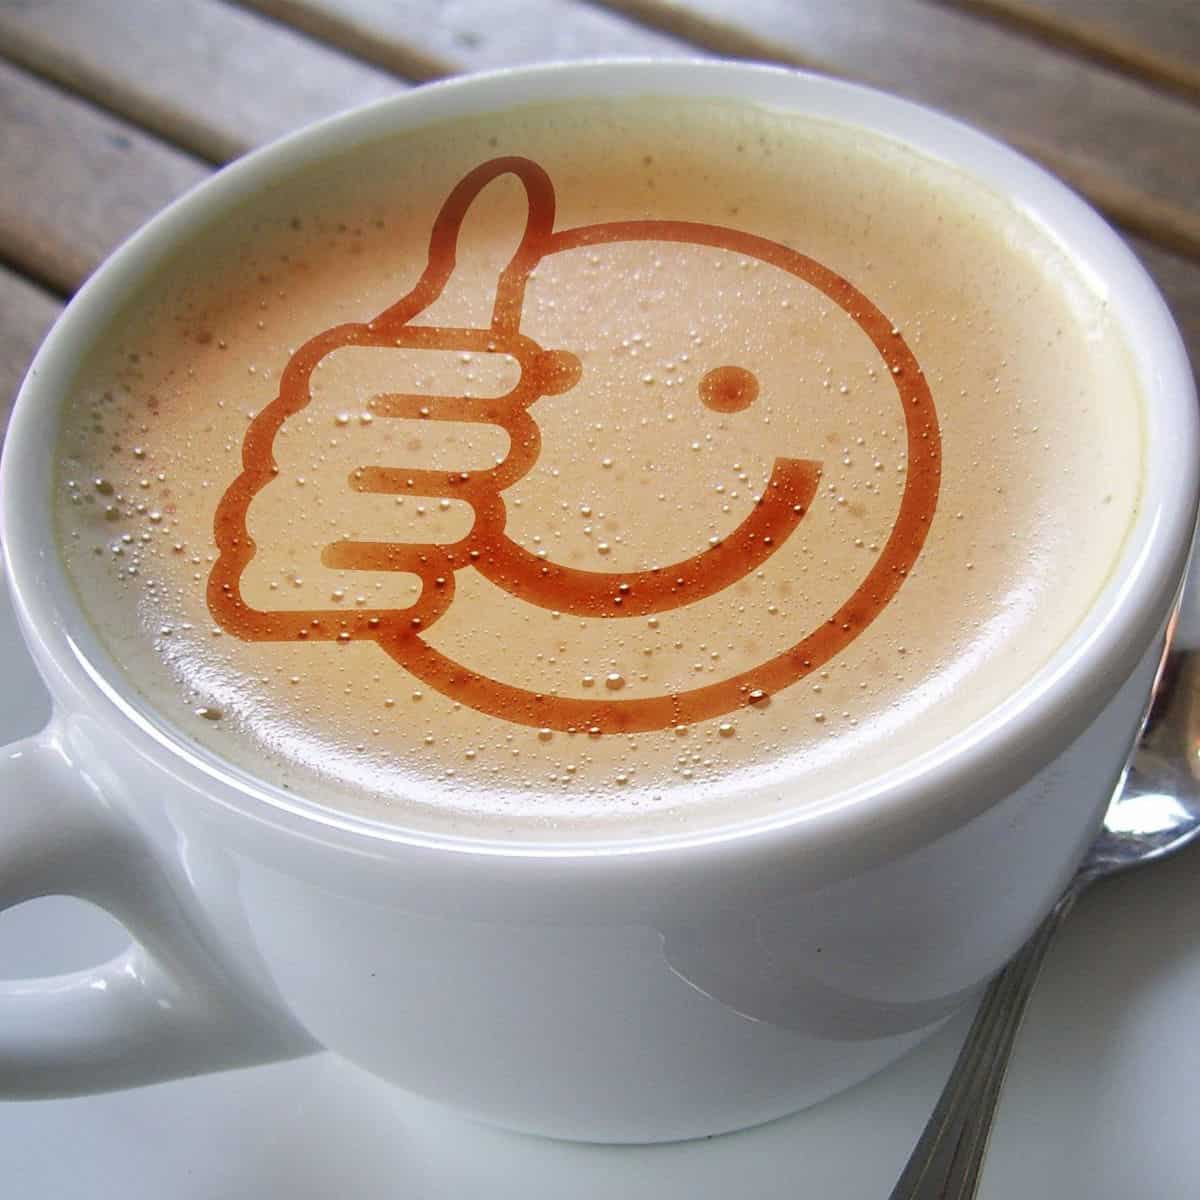 A white coffee mug with a silver spoon next to it on a wooden table backdrop. there is tan foam and a dark tan smiley face drawing with a thumbs up to the left of the face in thefoam